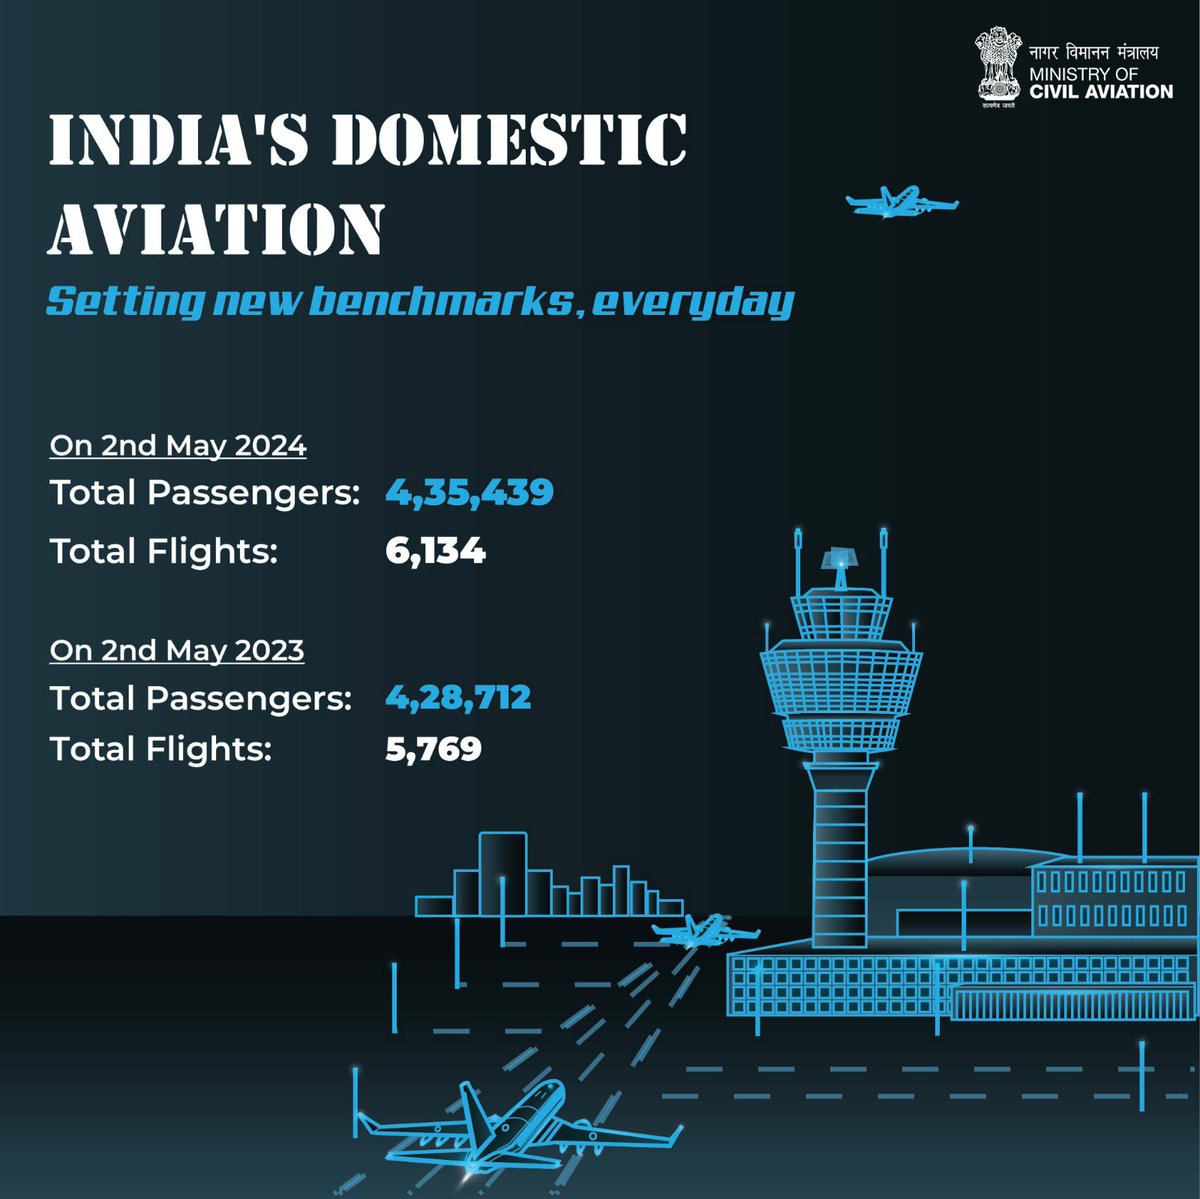 Domestic aviation in India is witnessing an unprecedented growth, driven by factors such as concrete policies, economic development, and expansion of low-cost carriers. As more people gain access to air travel, the sector is expected to continue its upward trajectory.